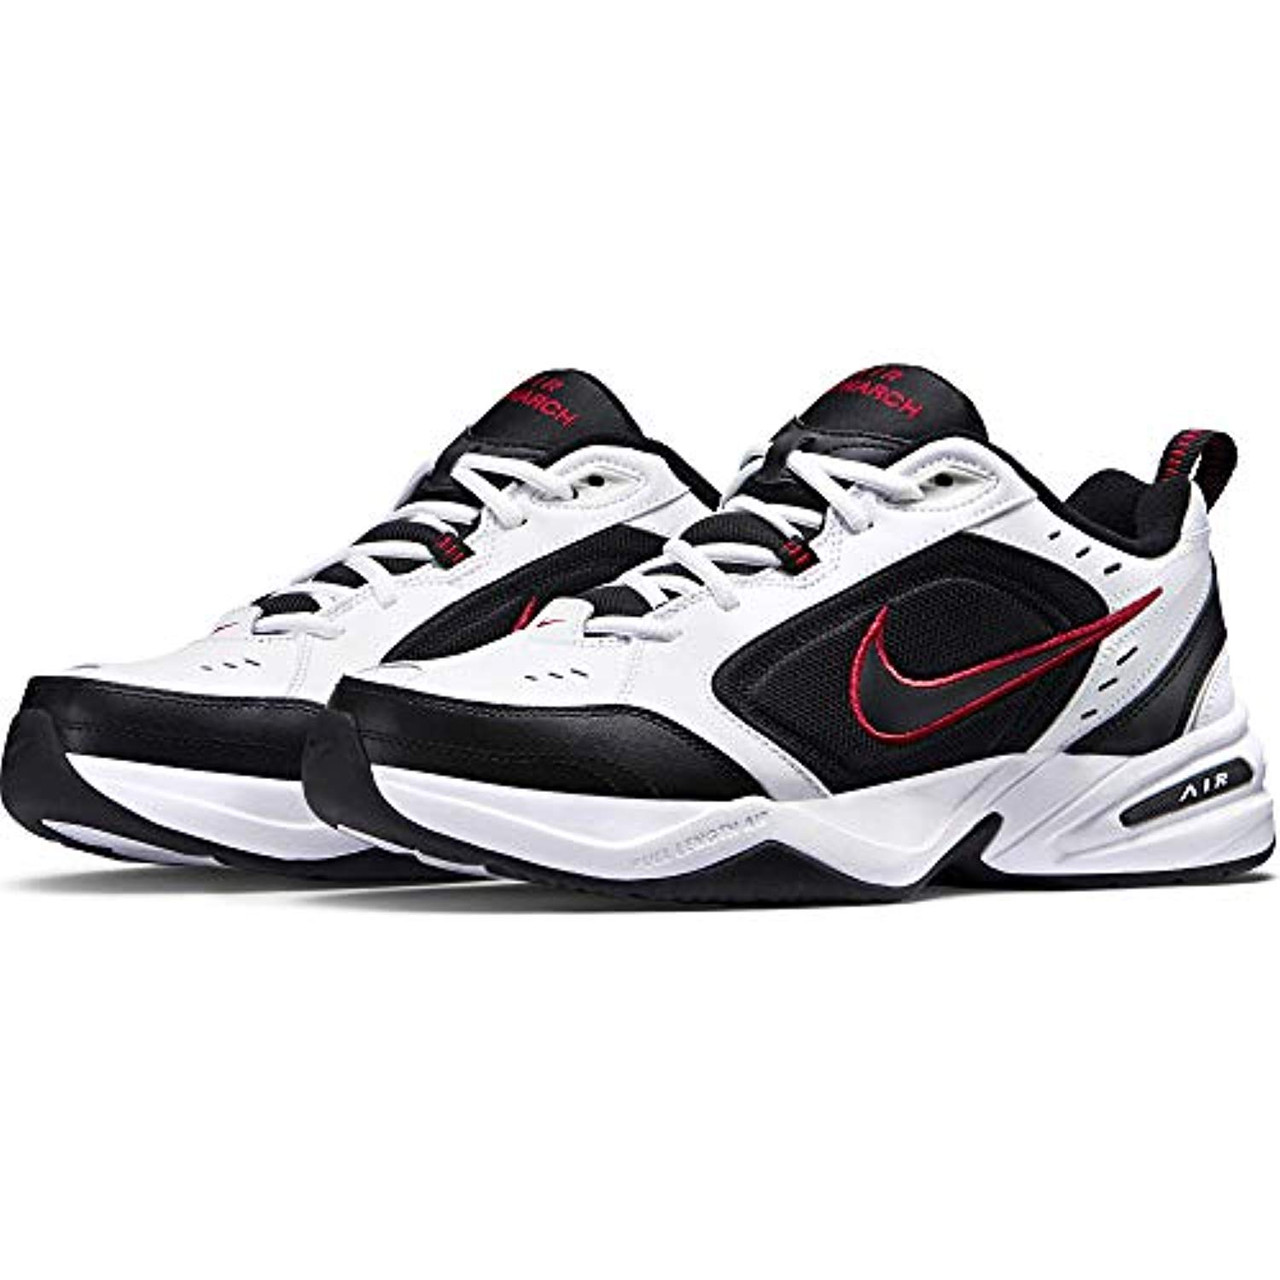 Nike Air Monarch Iv Black Red Flash Sales, UP TO 64% OFF | www.ldeventos.com